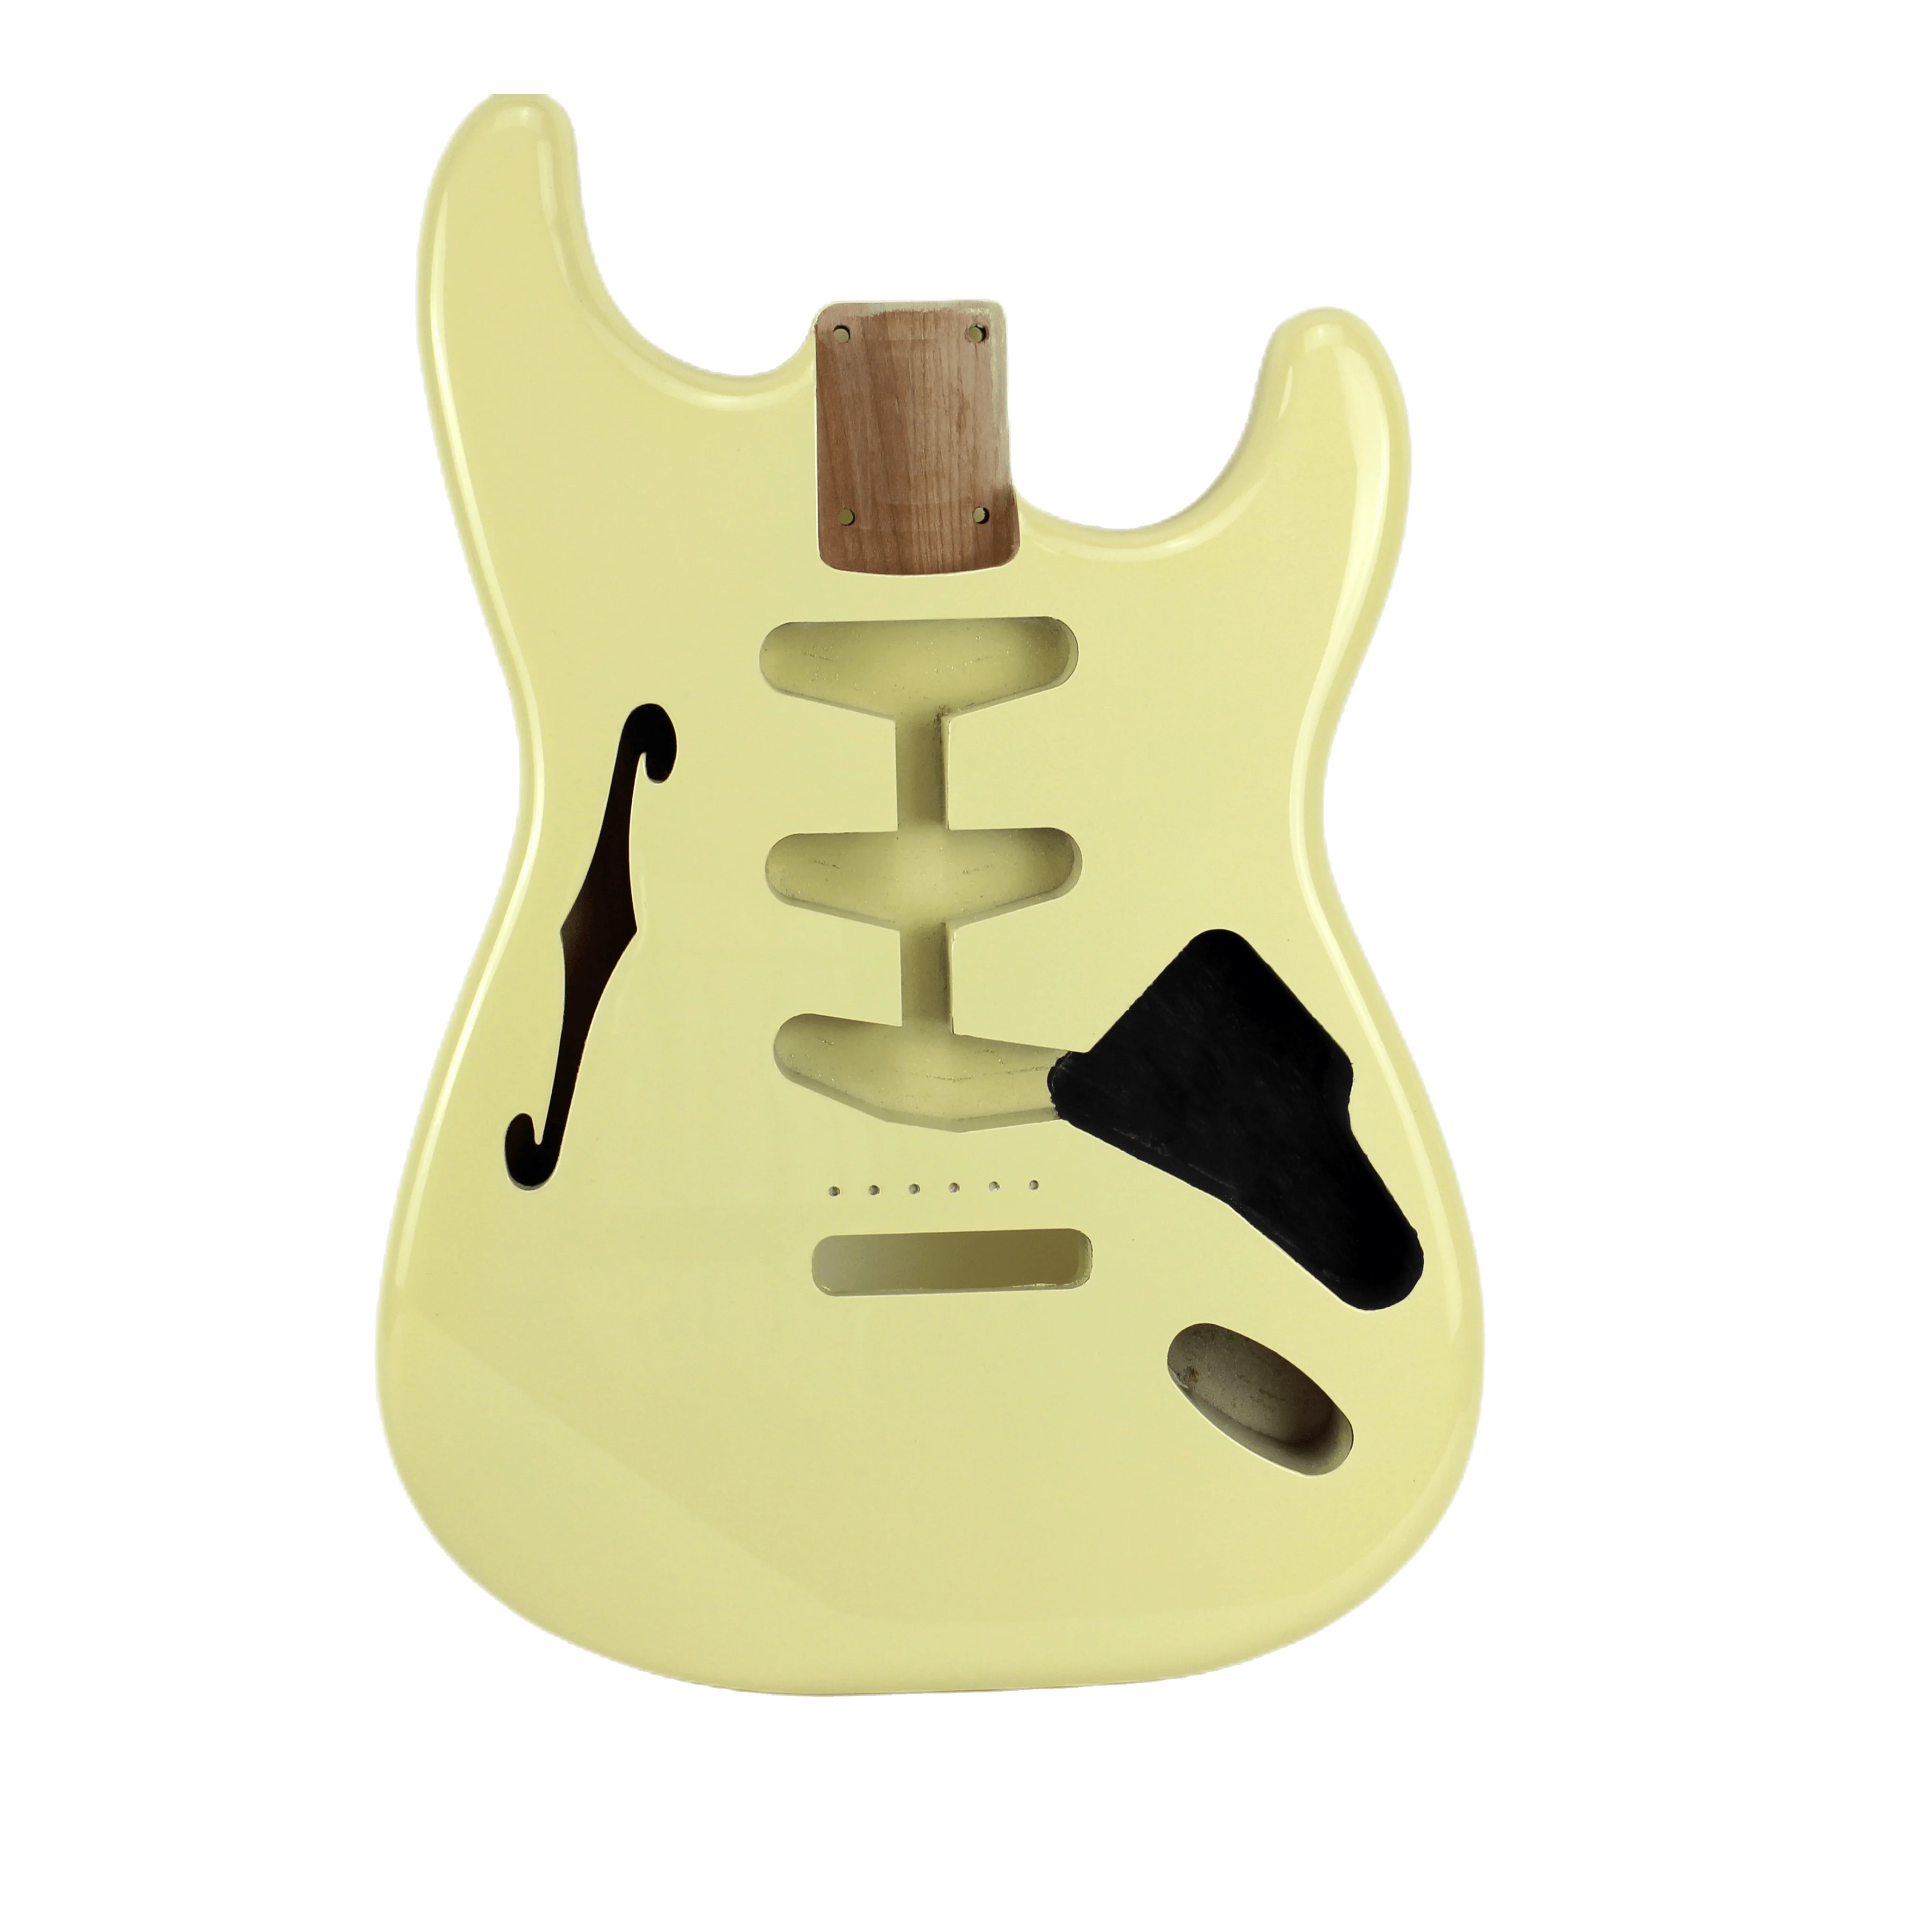 

Strat Thinline Electric Guitar Alder Wood Body With F Holes Yellow Body in High Gloss Finished for SSS Semi-hollow DIY Body